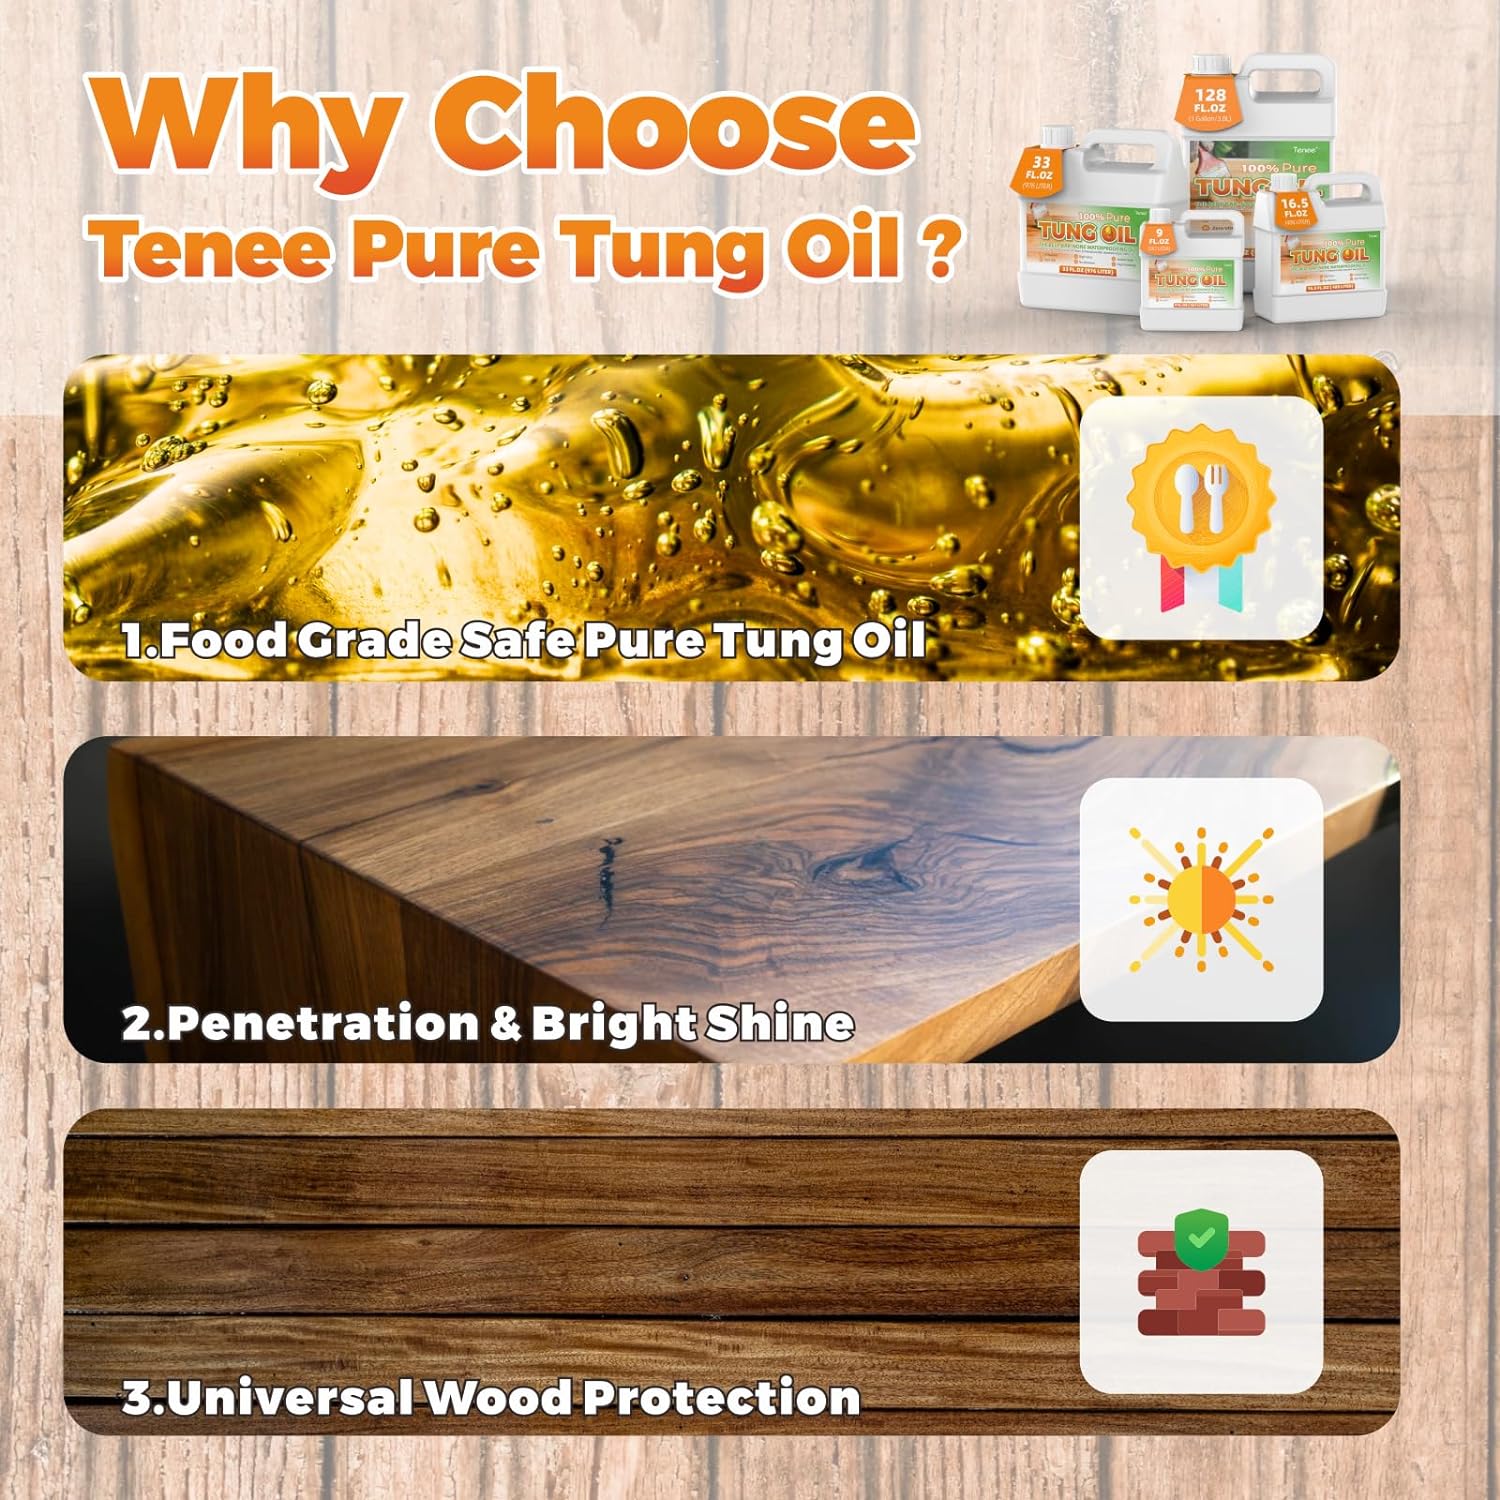 Tenee 33 Fl Oz Pure Tung Oil – Waterproof Tung Oil That Strengthens & Protect Wood – Give Your Wood Projects Food Grade Tung Oil Finish – Food Safe Wood Sealer for Pet Houses, Garden Boxes, and More : Health & Household